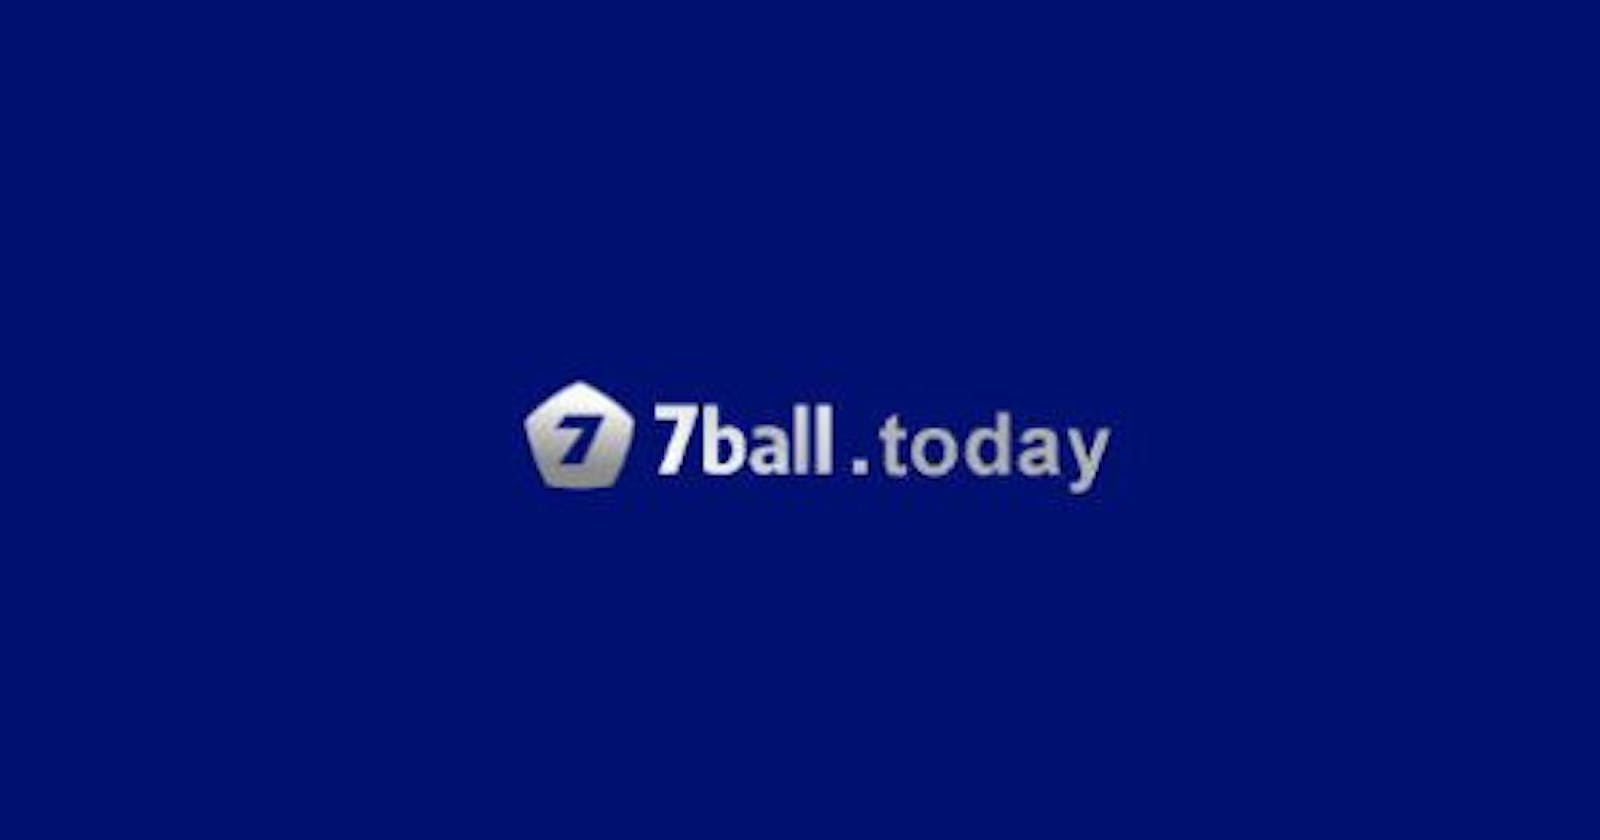 7ball-today